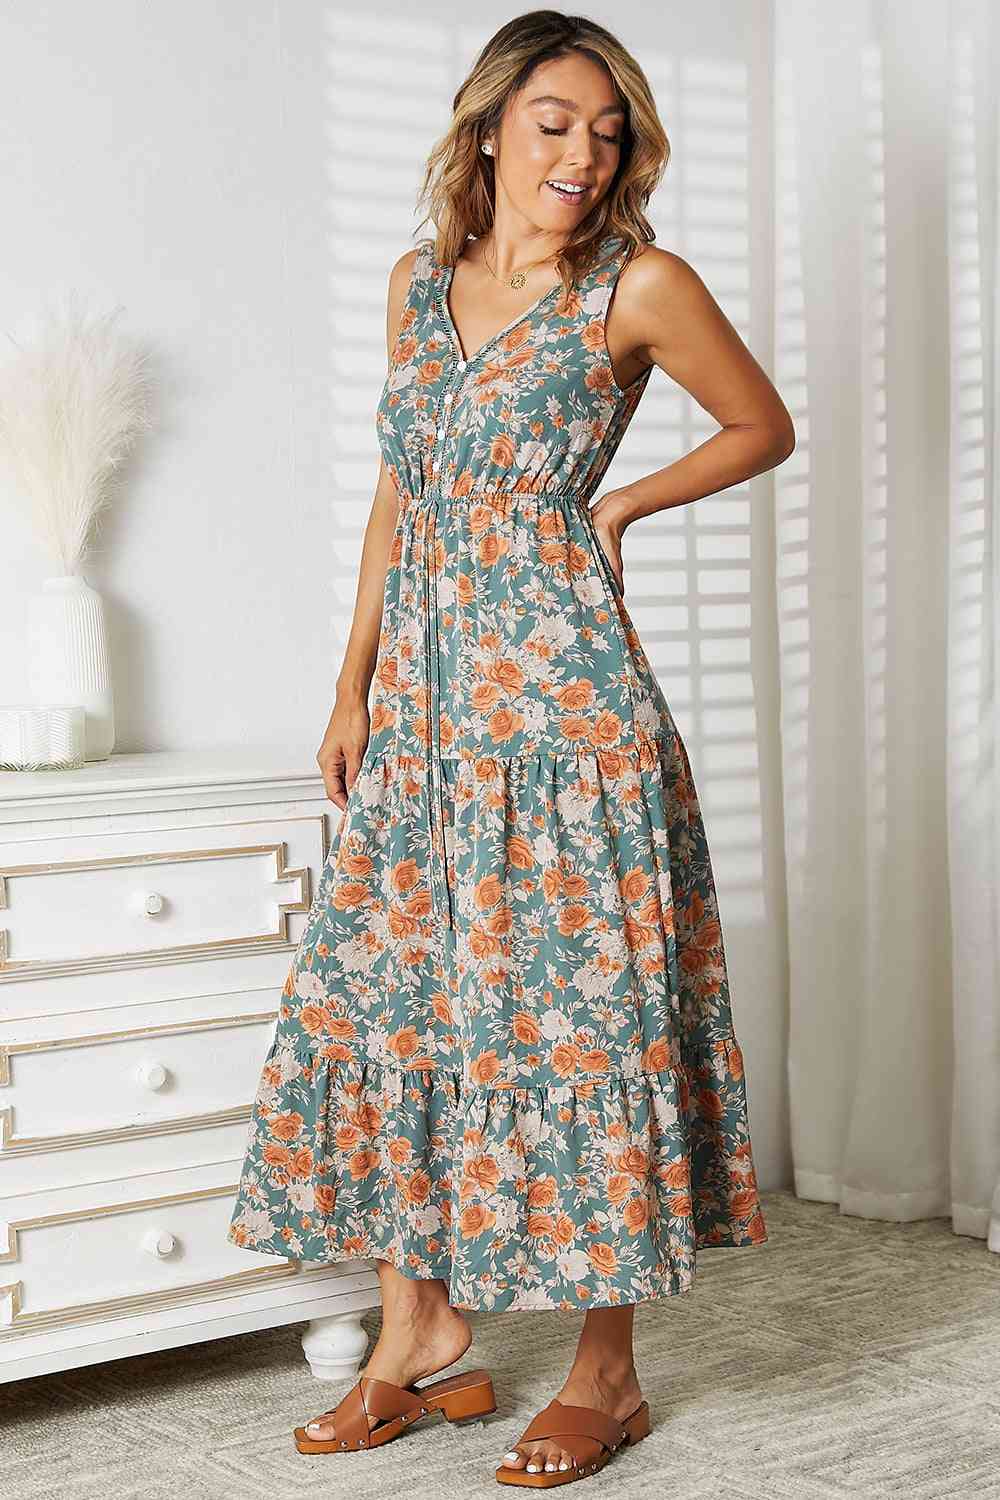 Double Take Floral V-Neck Tiered Sleeveless Dress No 3